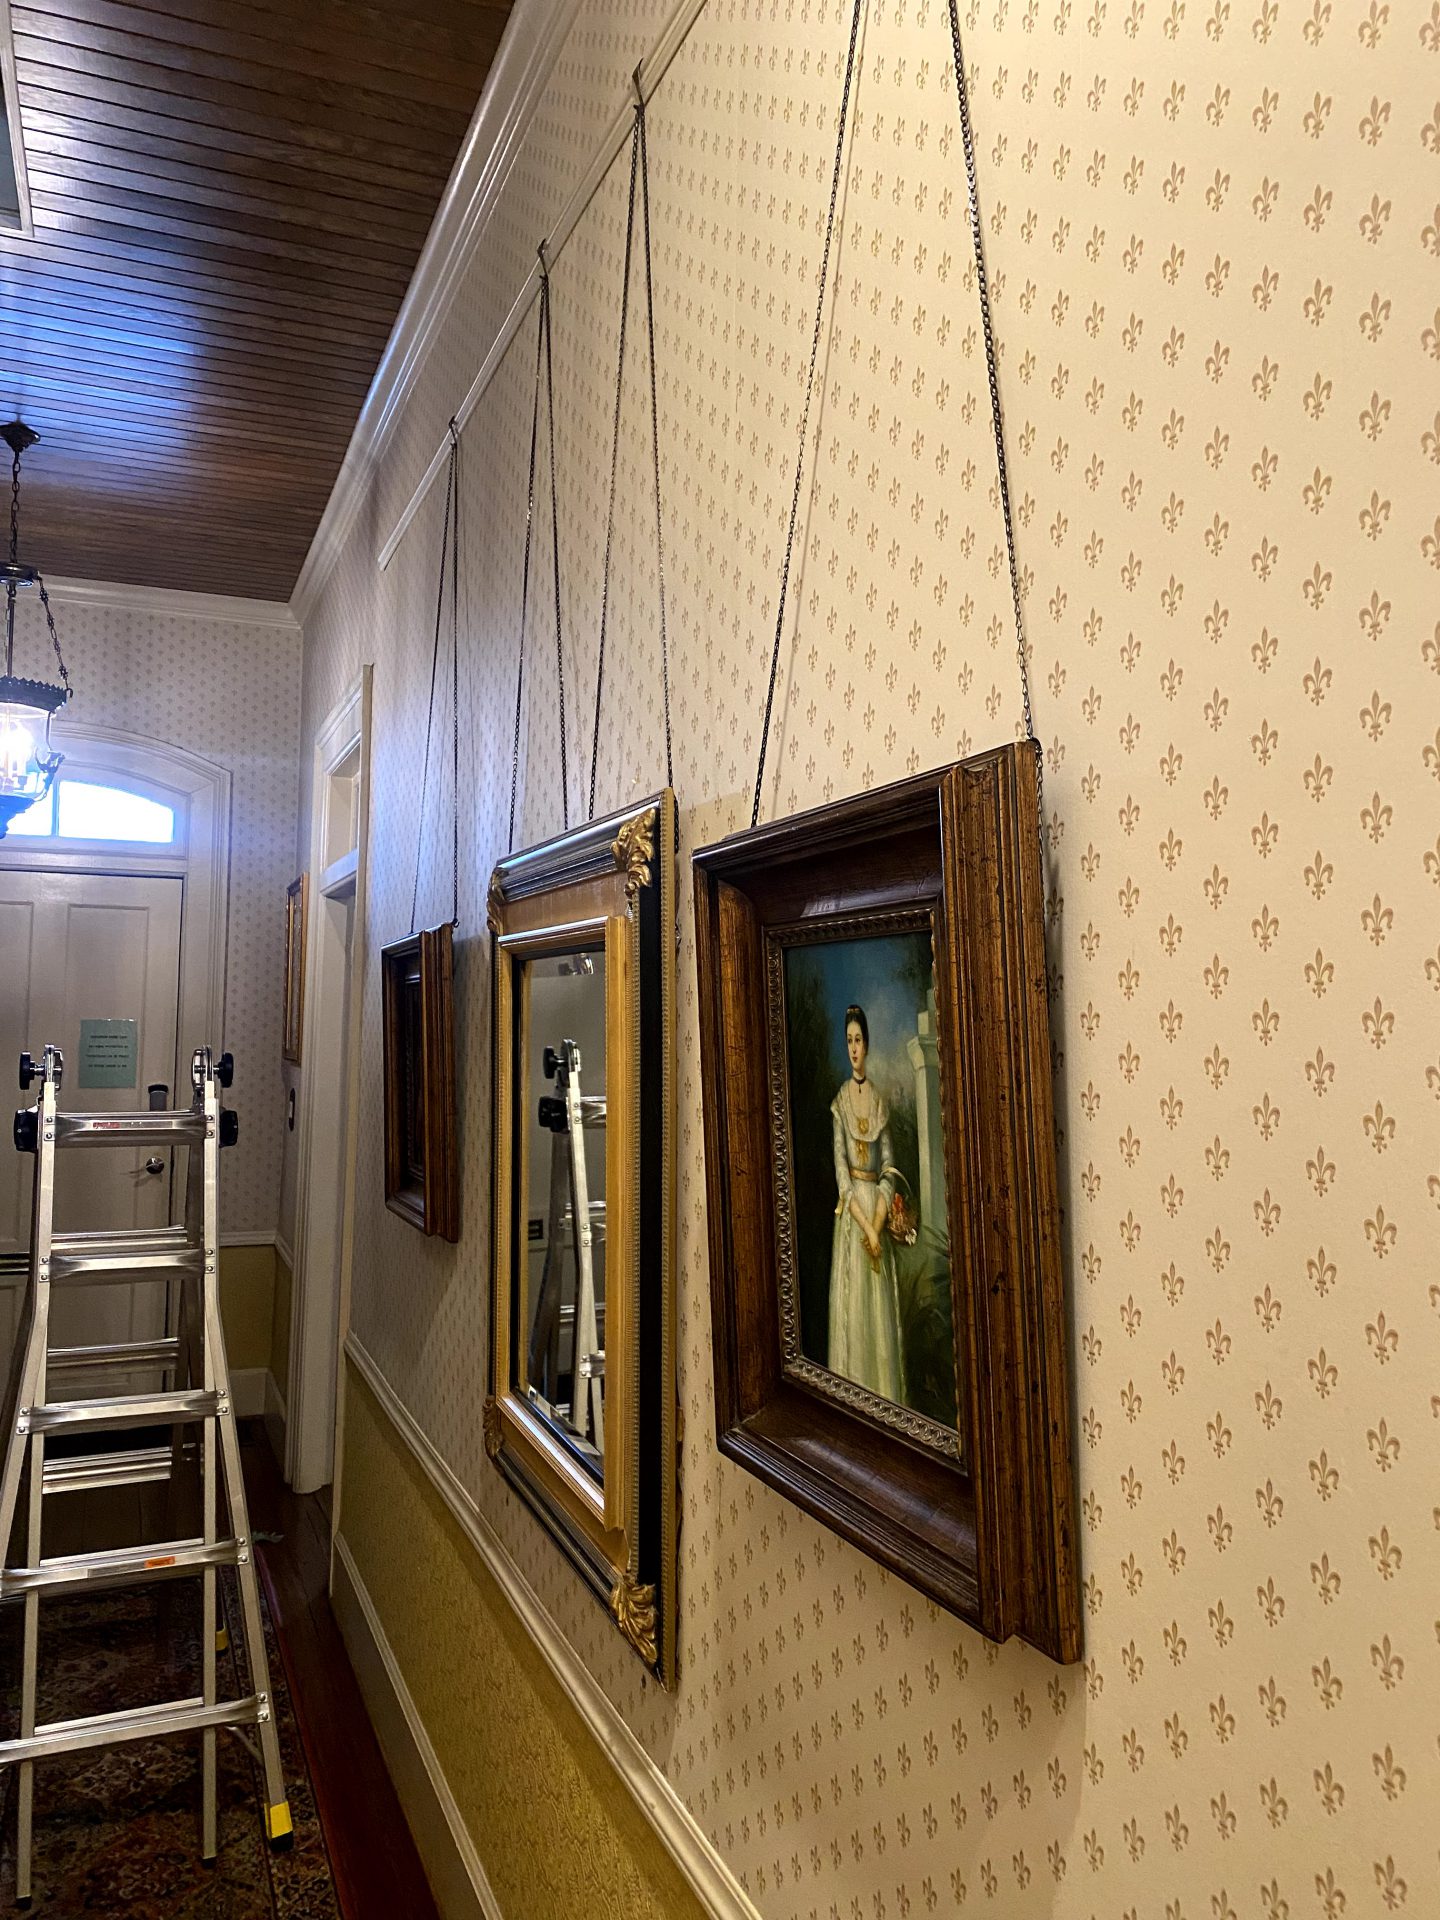 How to Use Ropes and Knots to Turn a Plain Mirror Into an Ornate